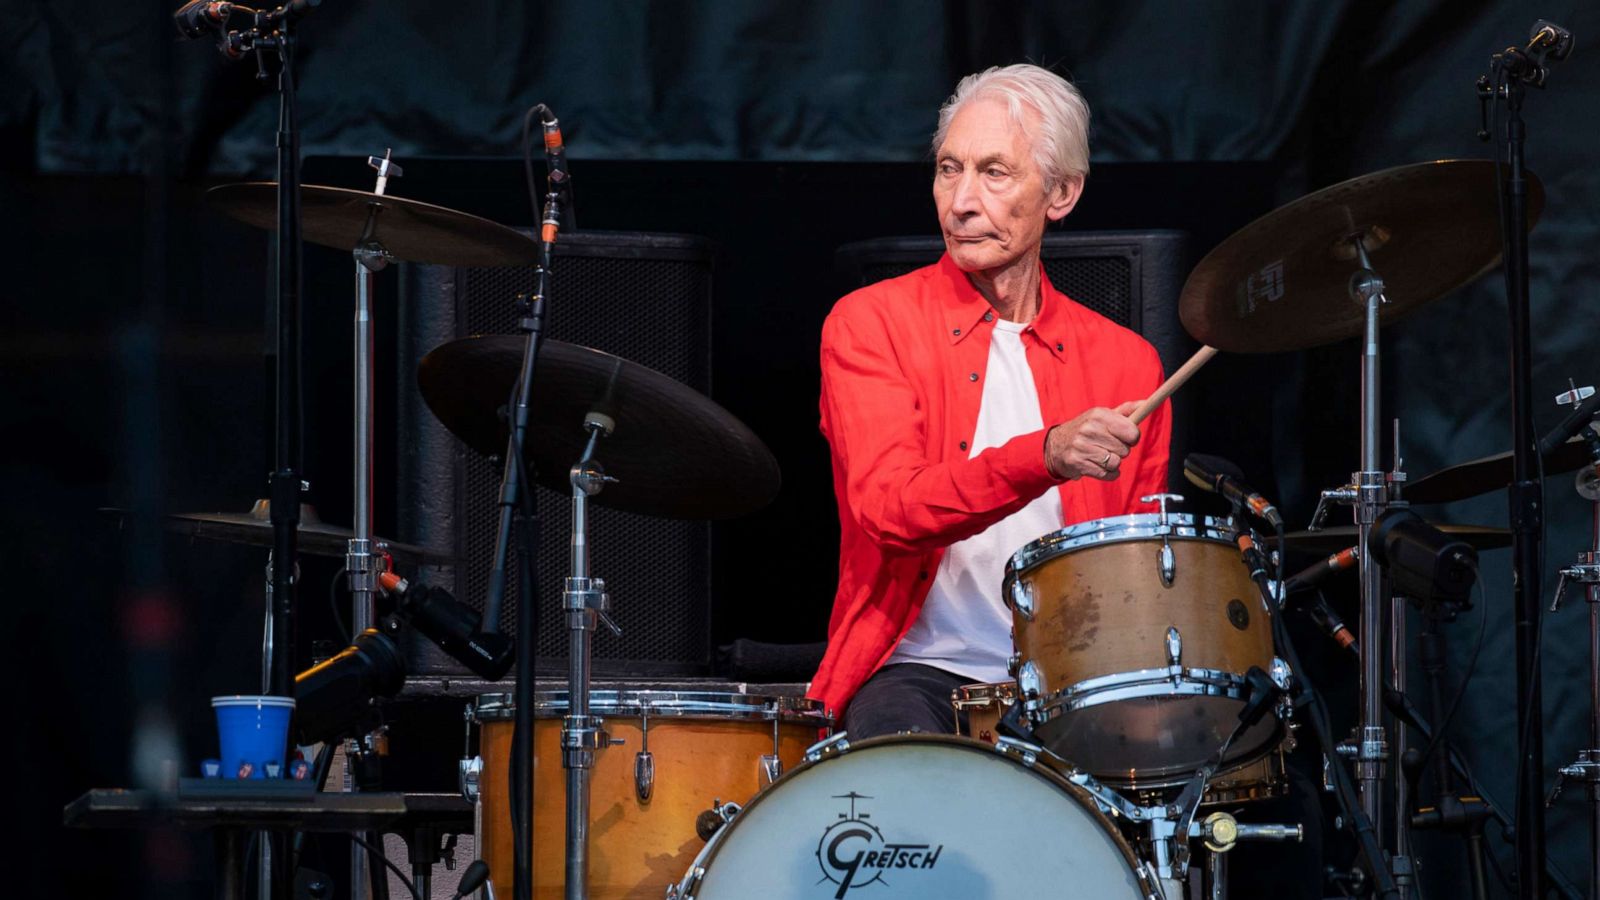 PHOTO: Charlie Watts of The Rolling Stones performs live on stage at Old Trafford on June 5, 2018 in Manchester, England.